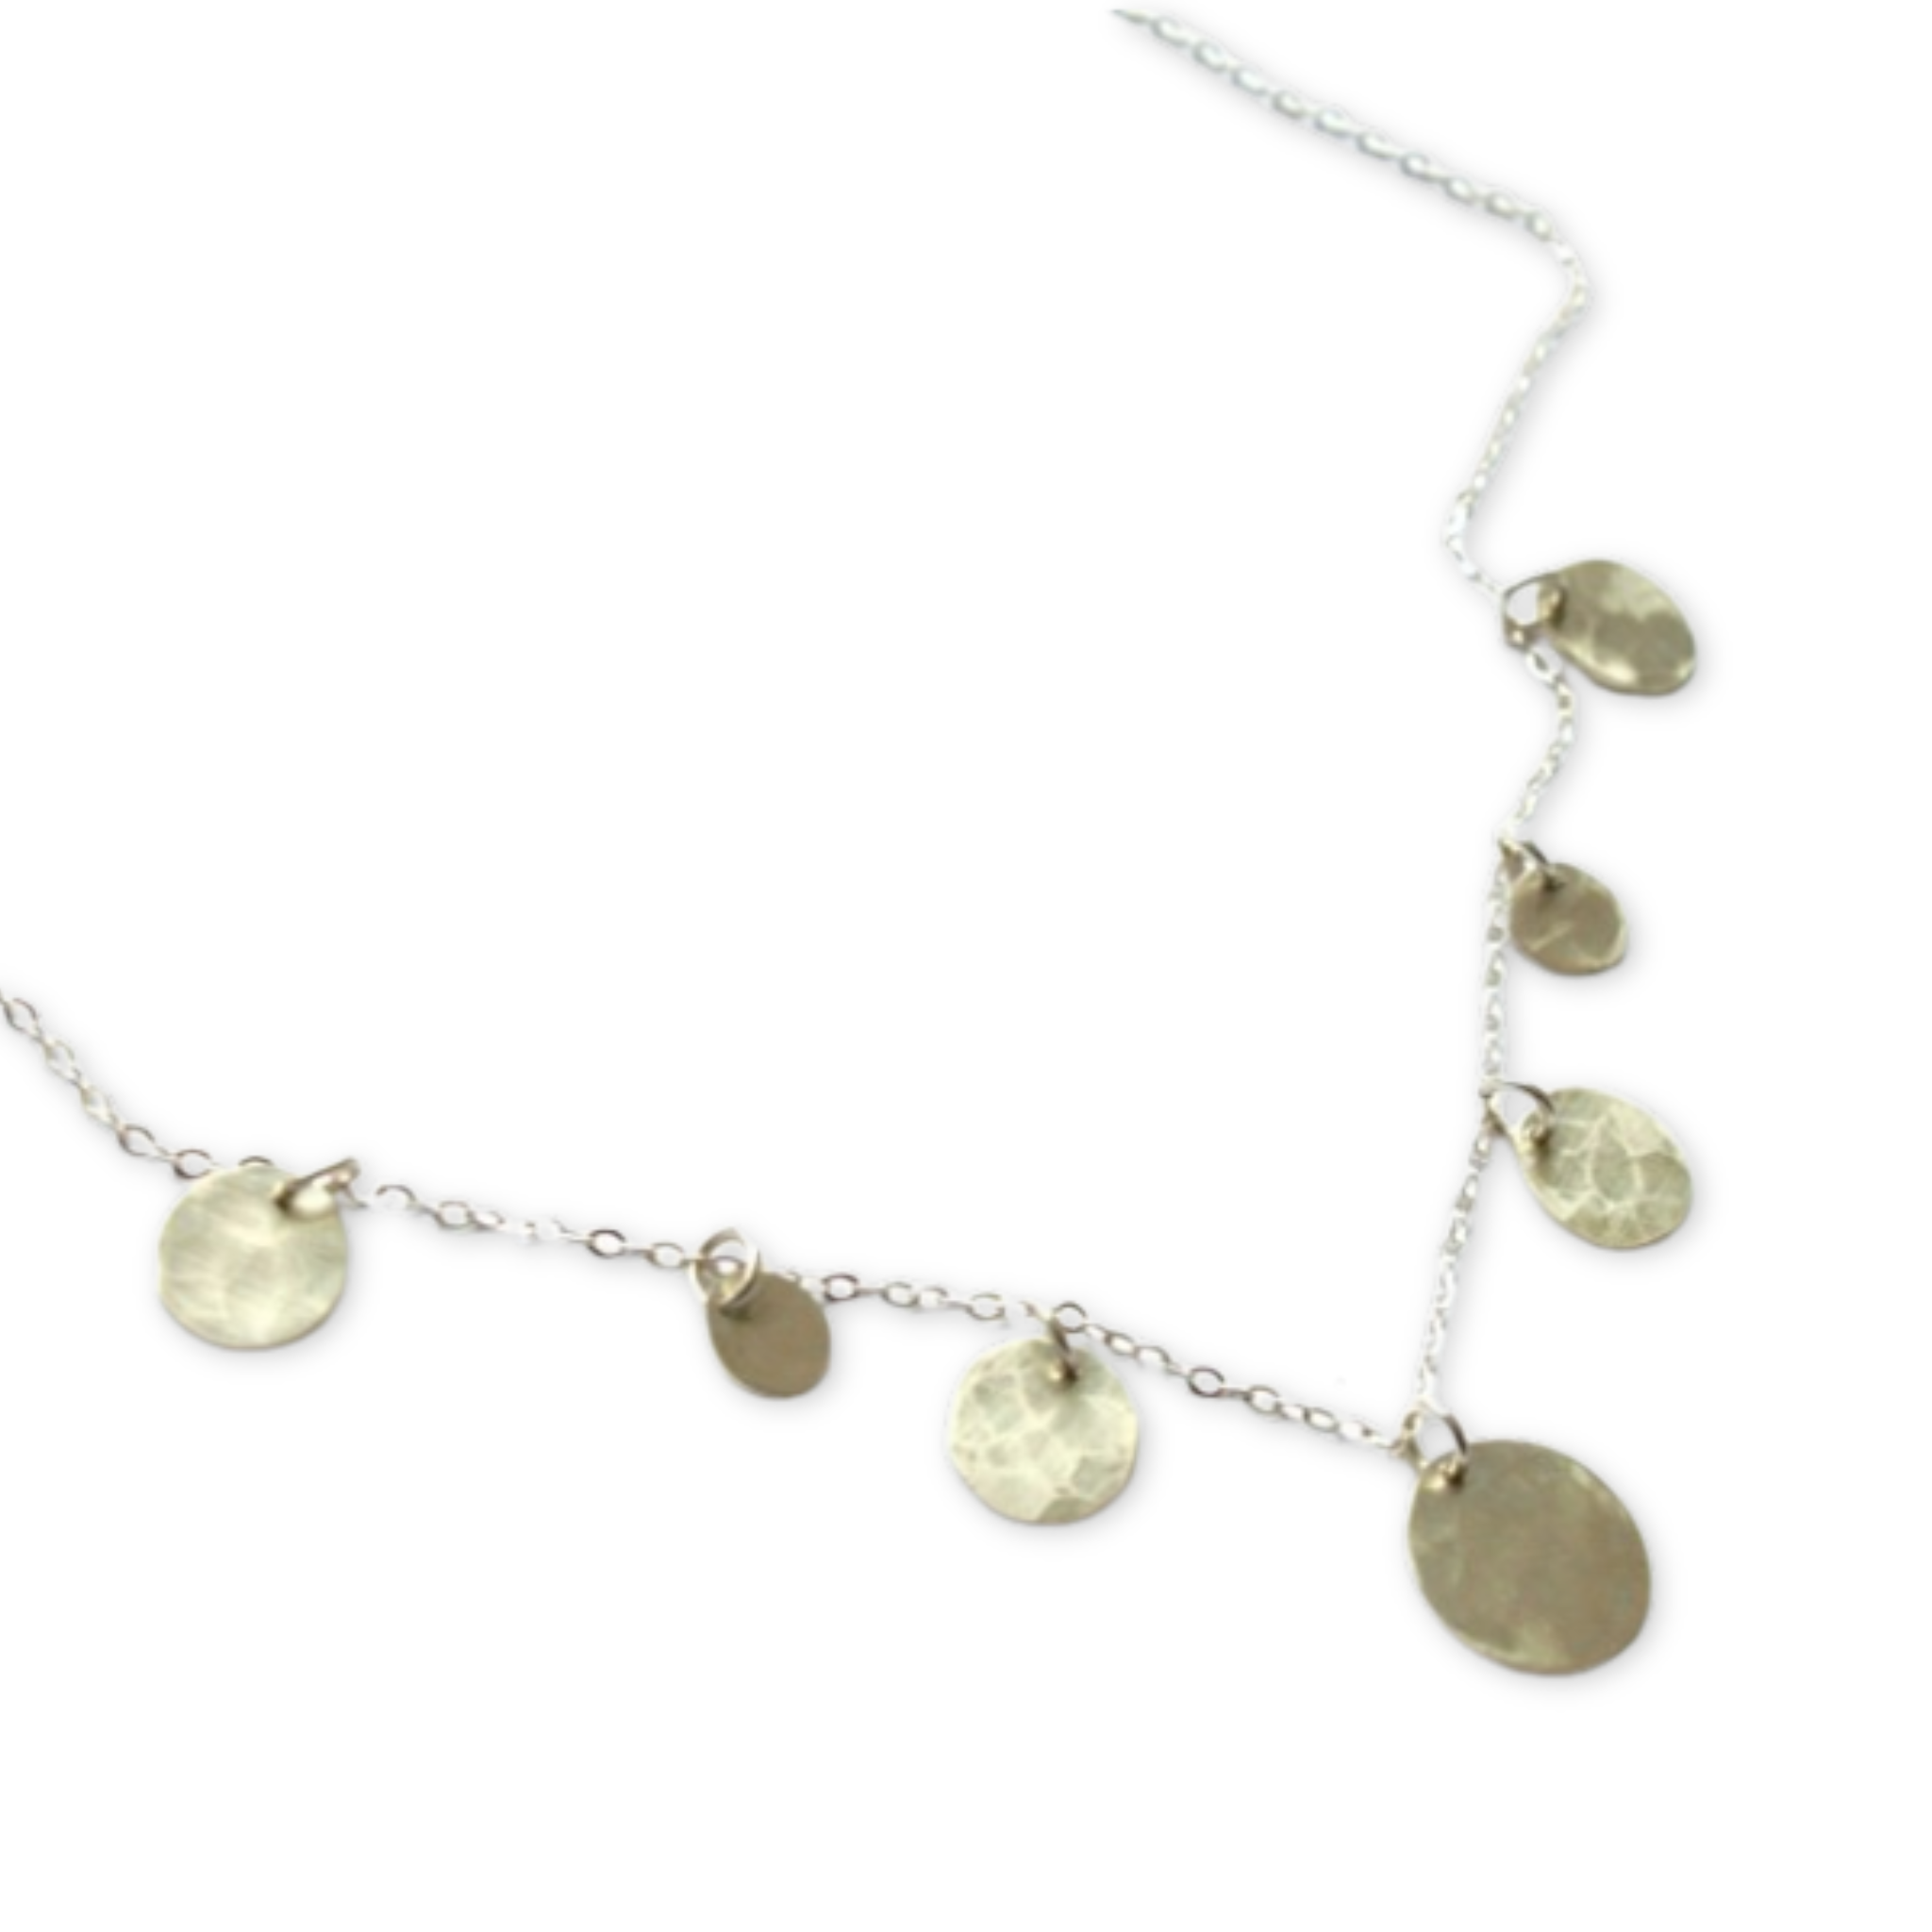 necklace with seven hammered round discs